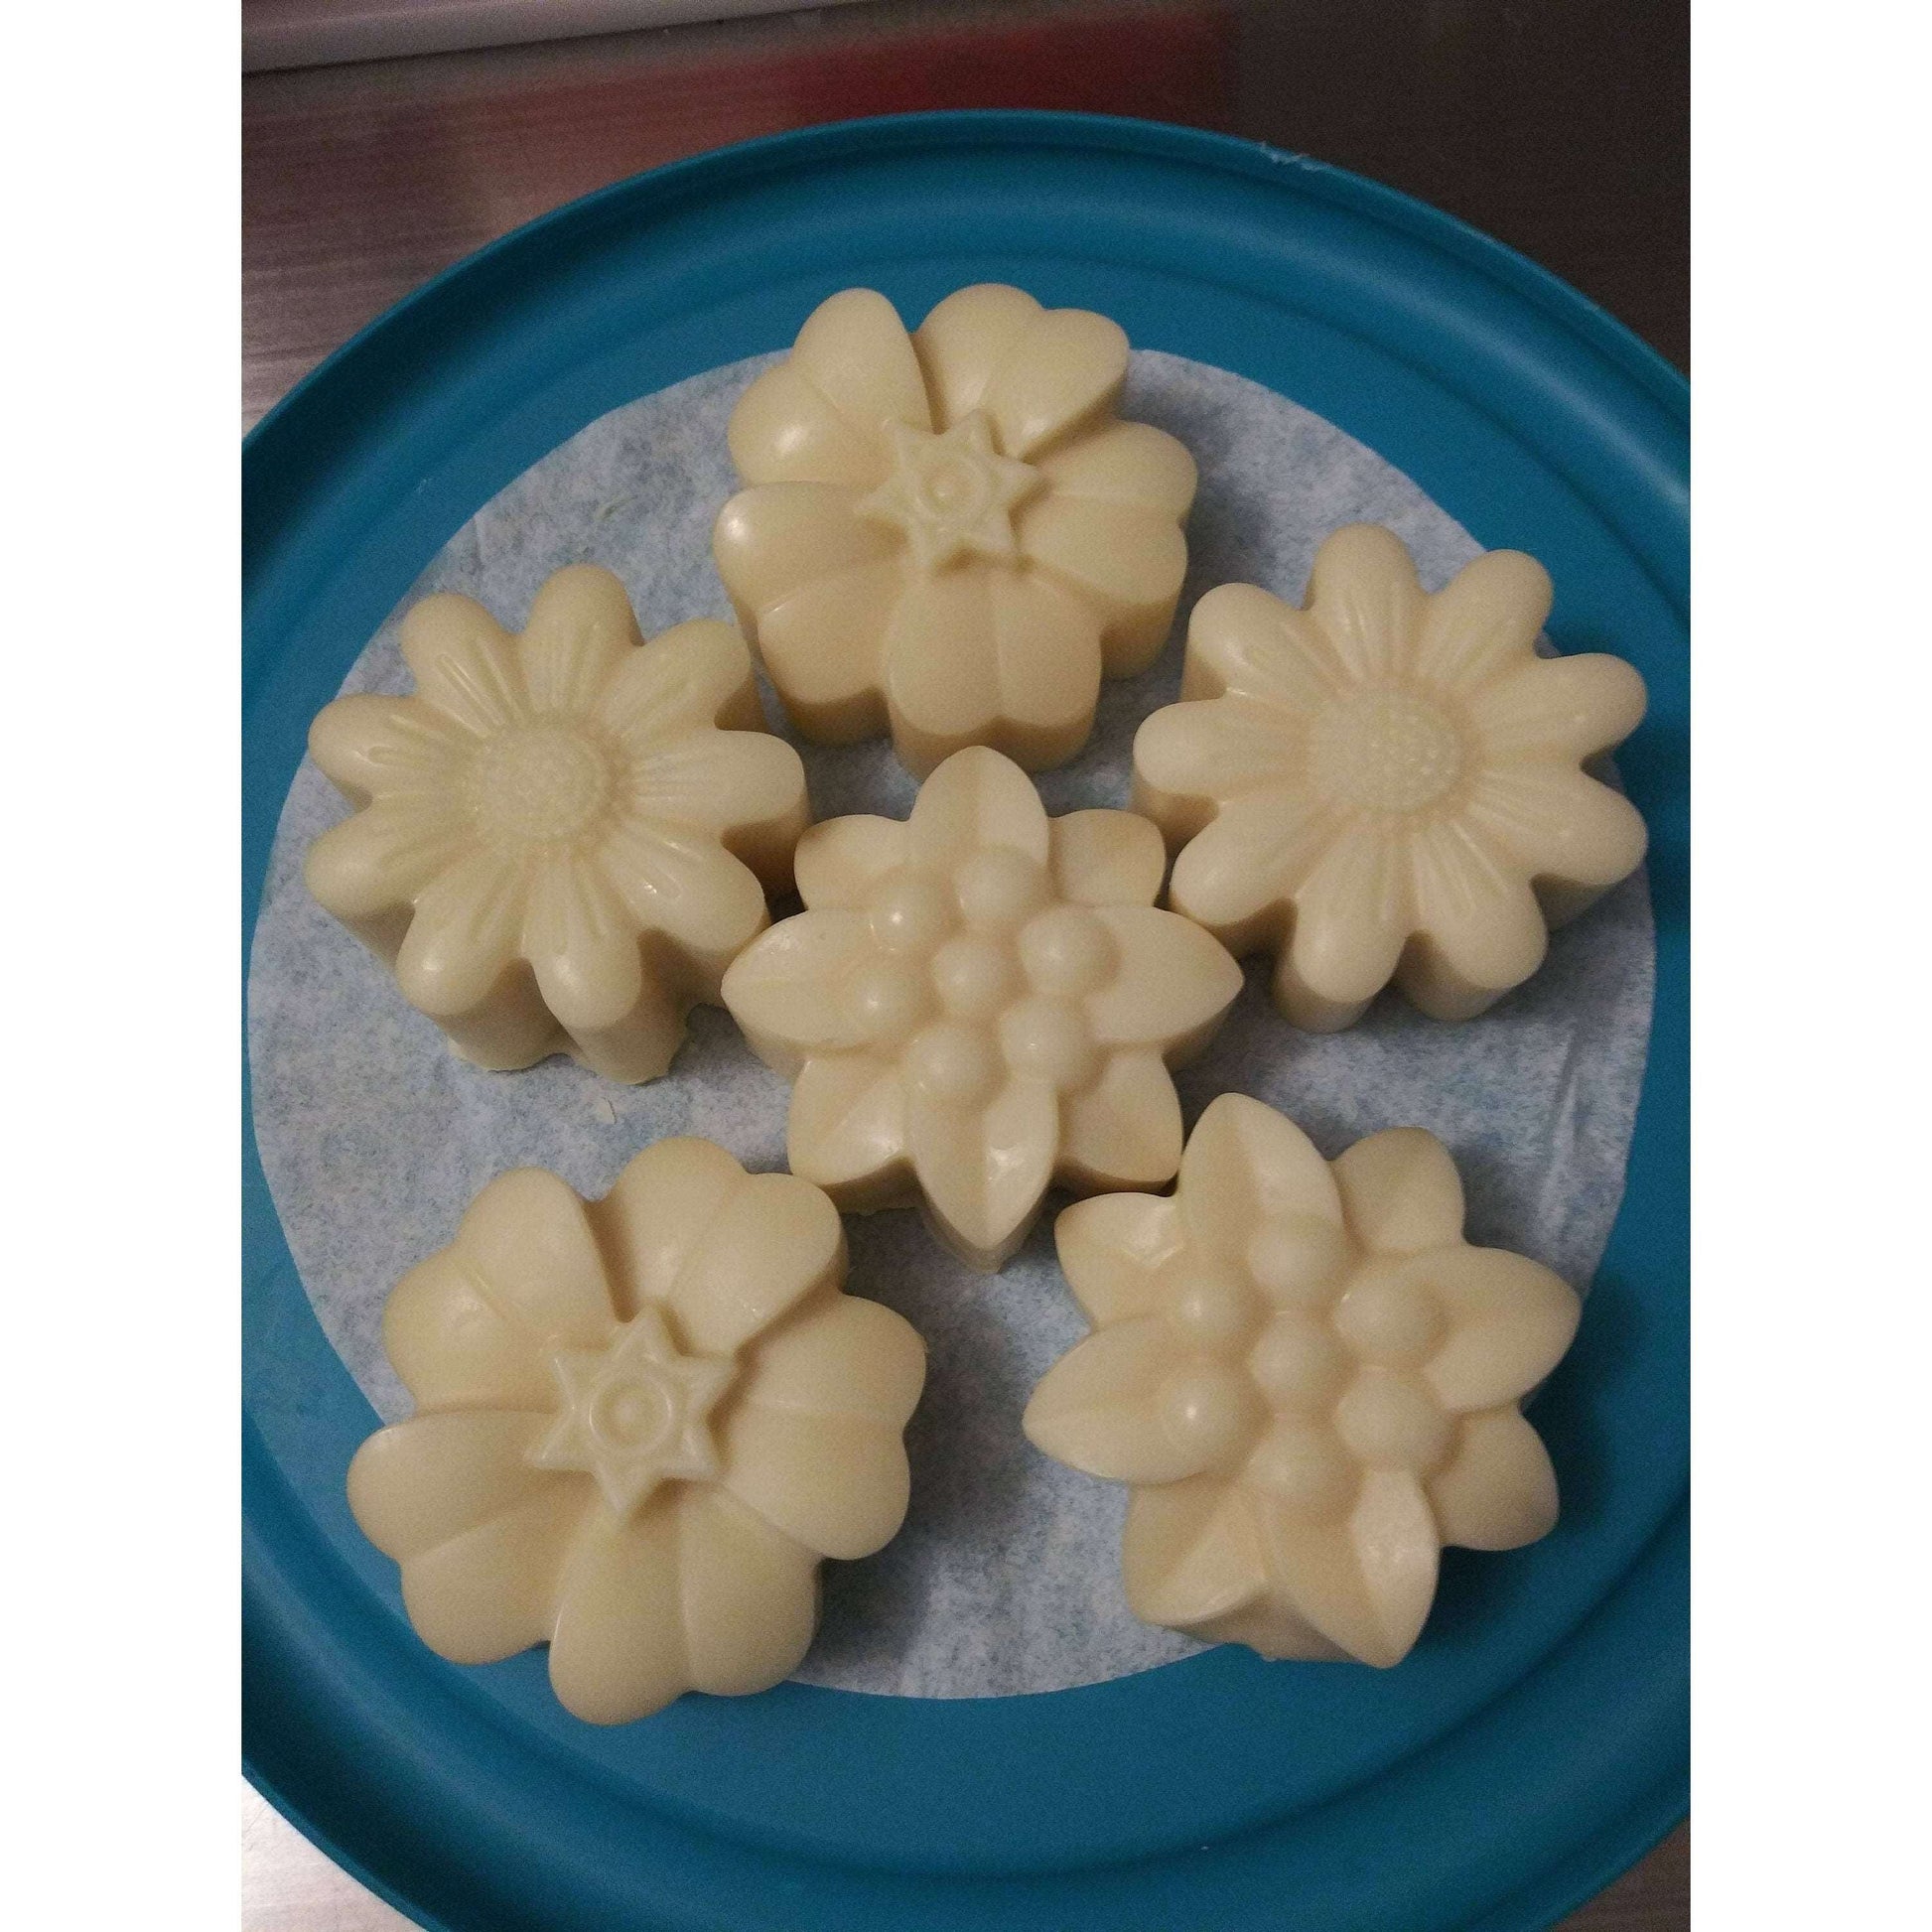 Solid Lotion Bars/Massage Bars/Body Butter Bars Lotion & Moisturizer Robinson Family Soaps Natural  